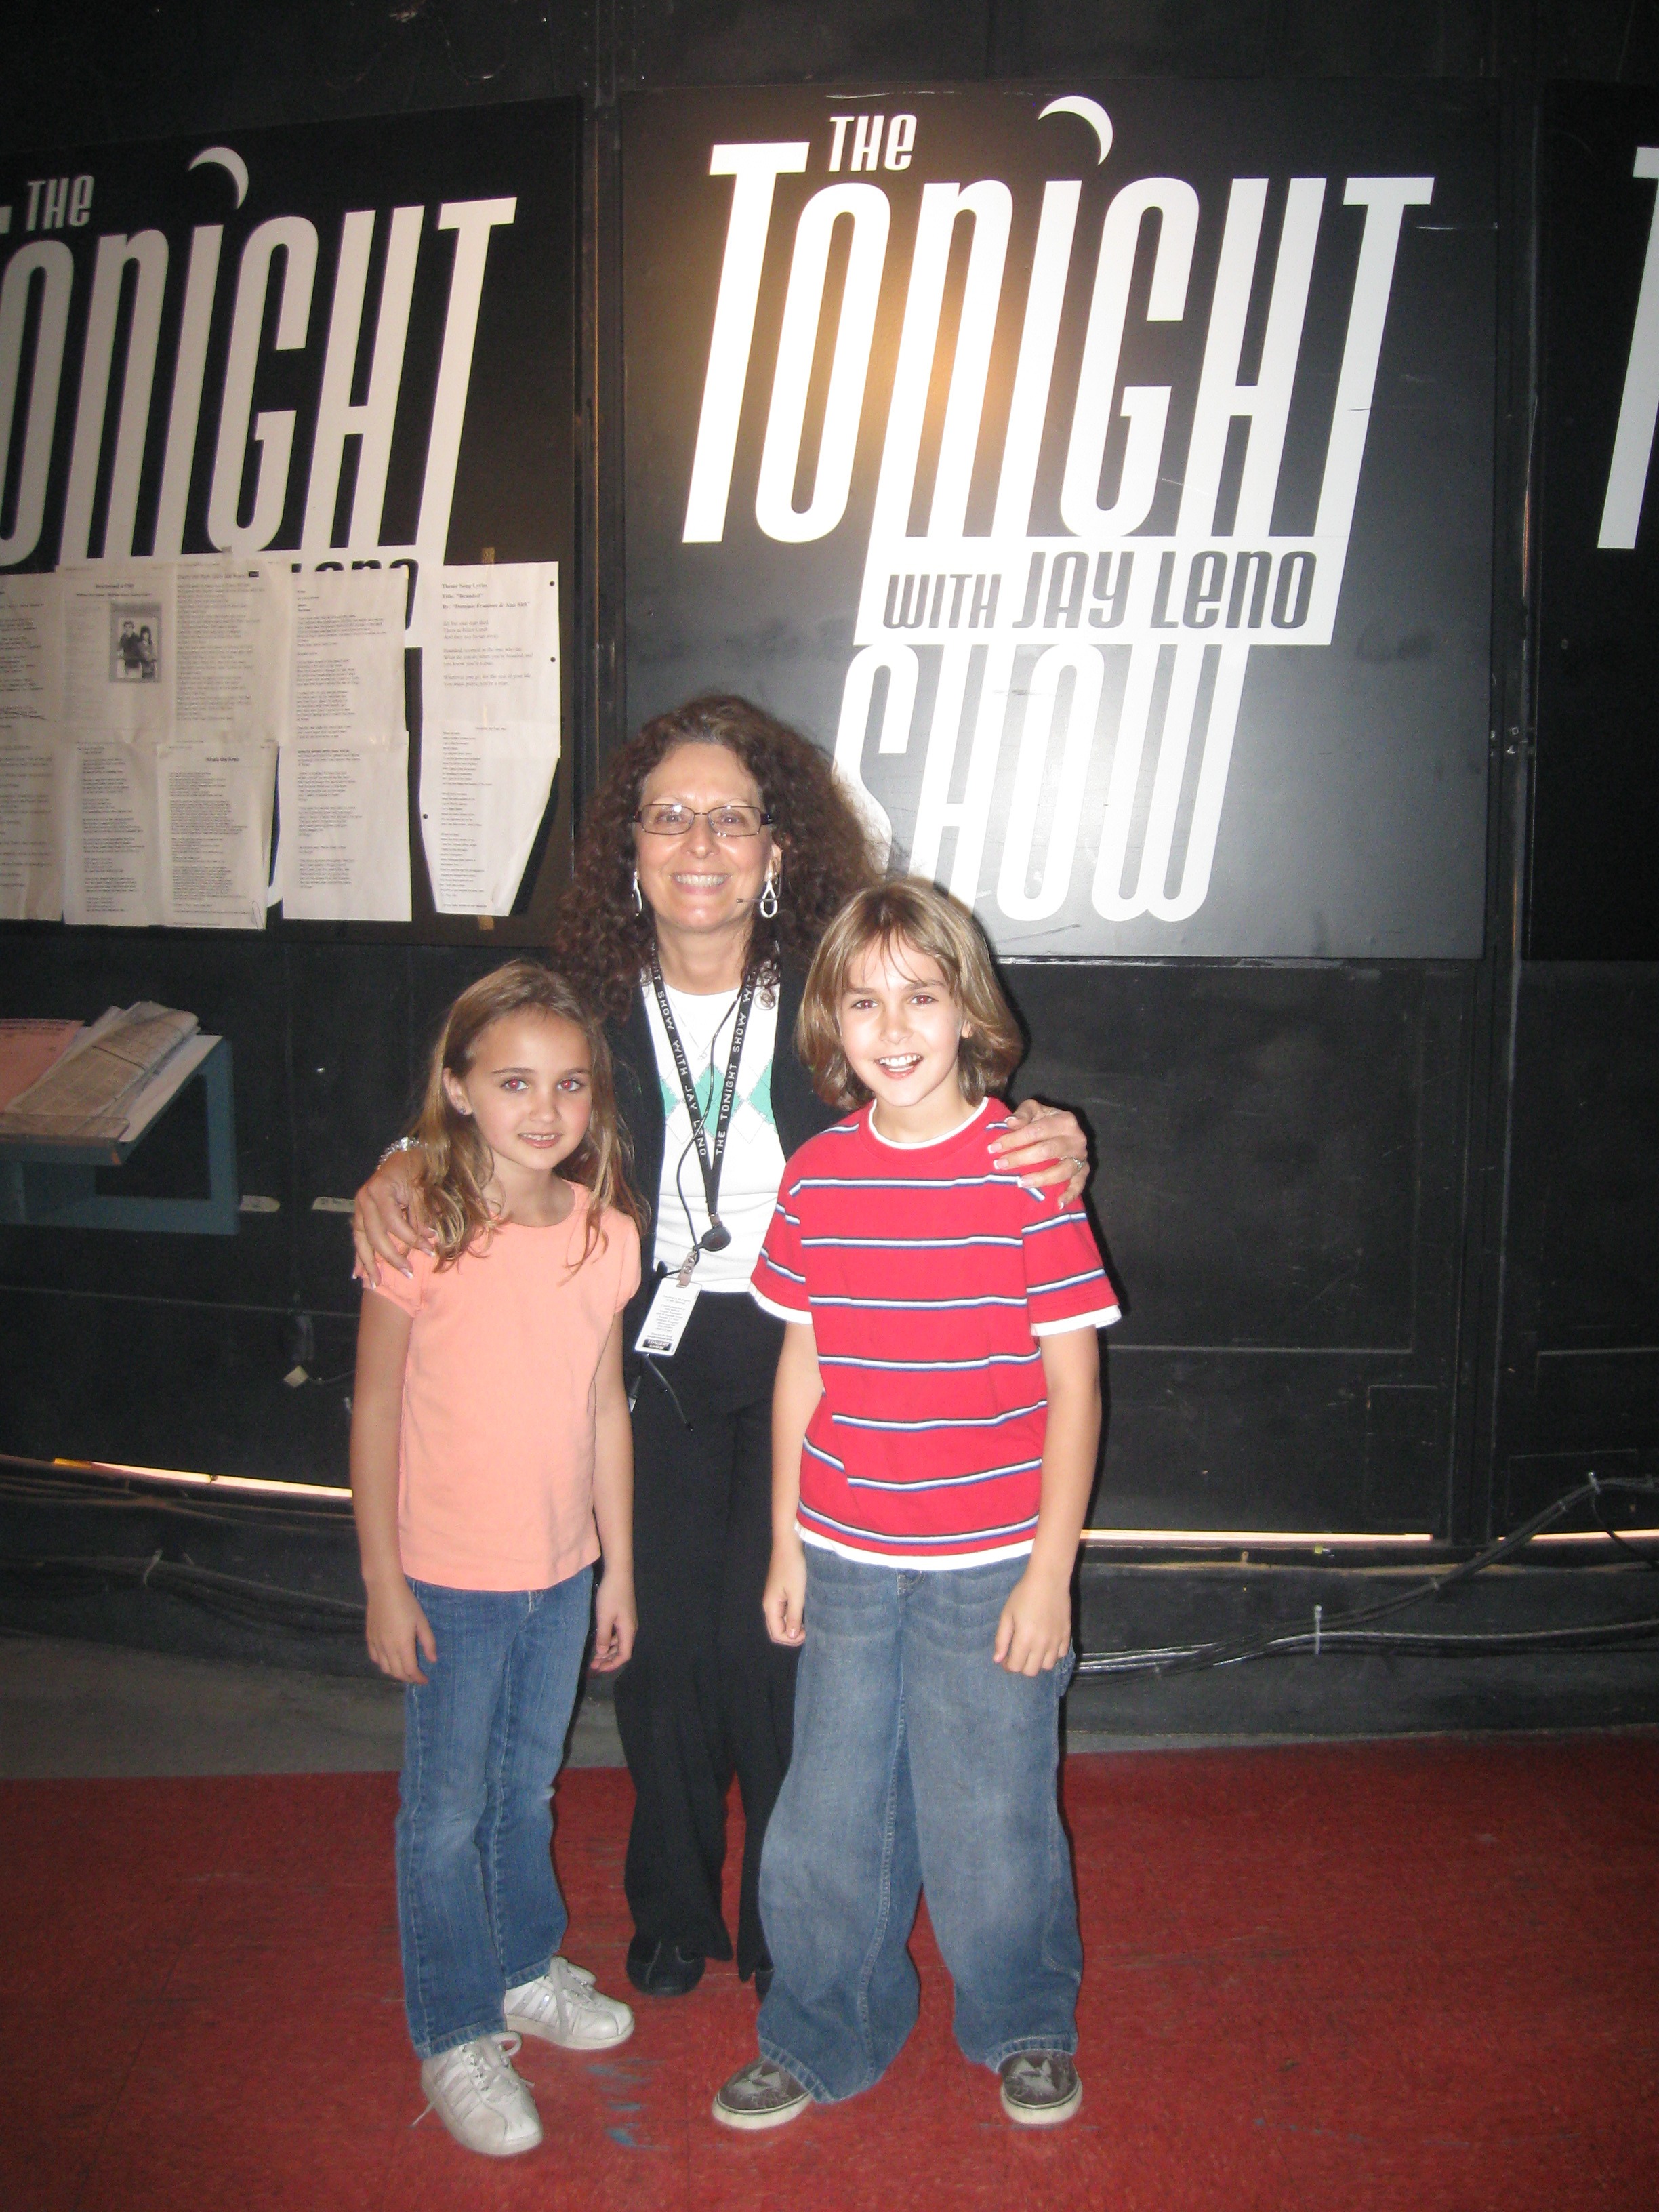 Michael and Jamie Ormsby with Roberta, the stage manager of The Tonight Show with Jay Leno